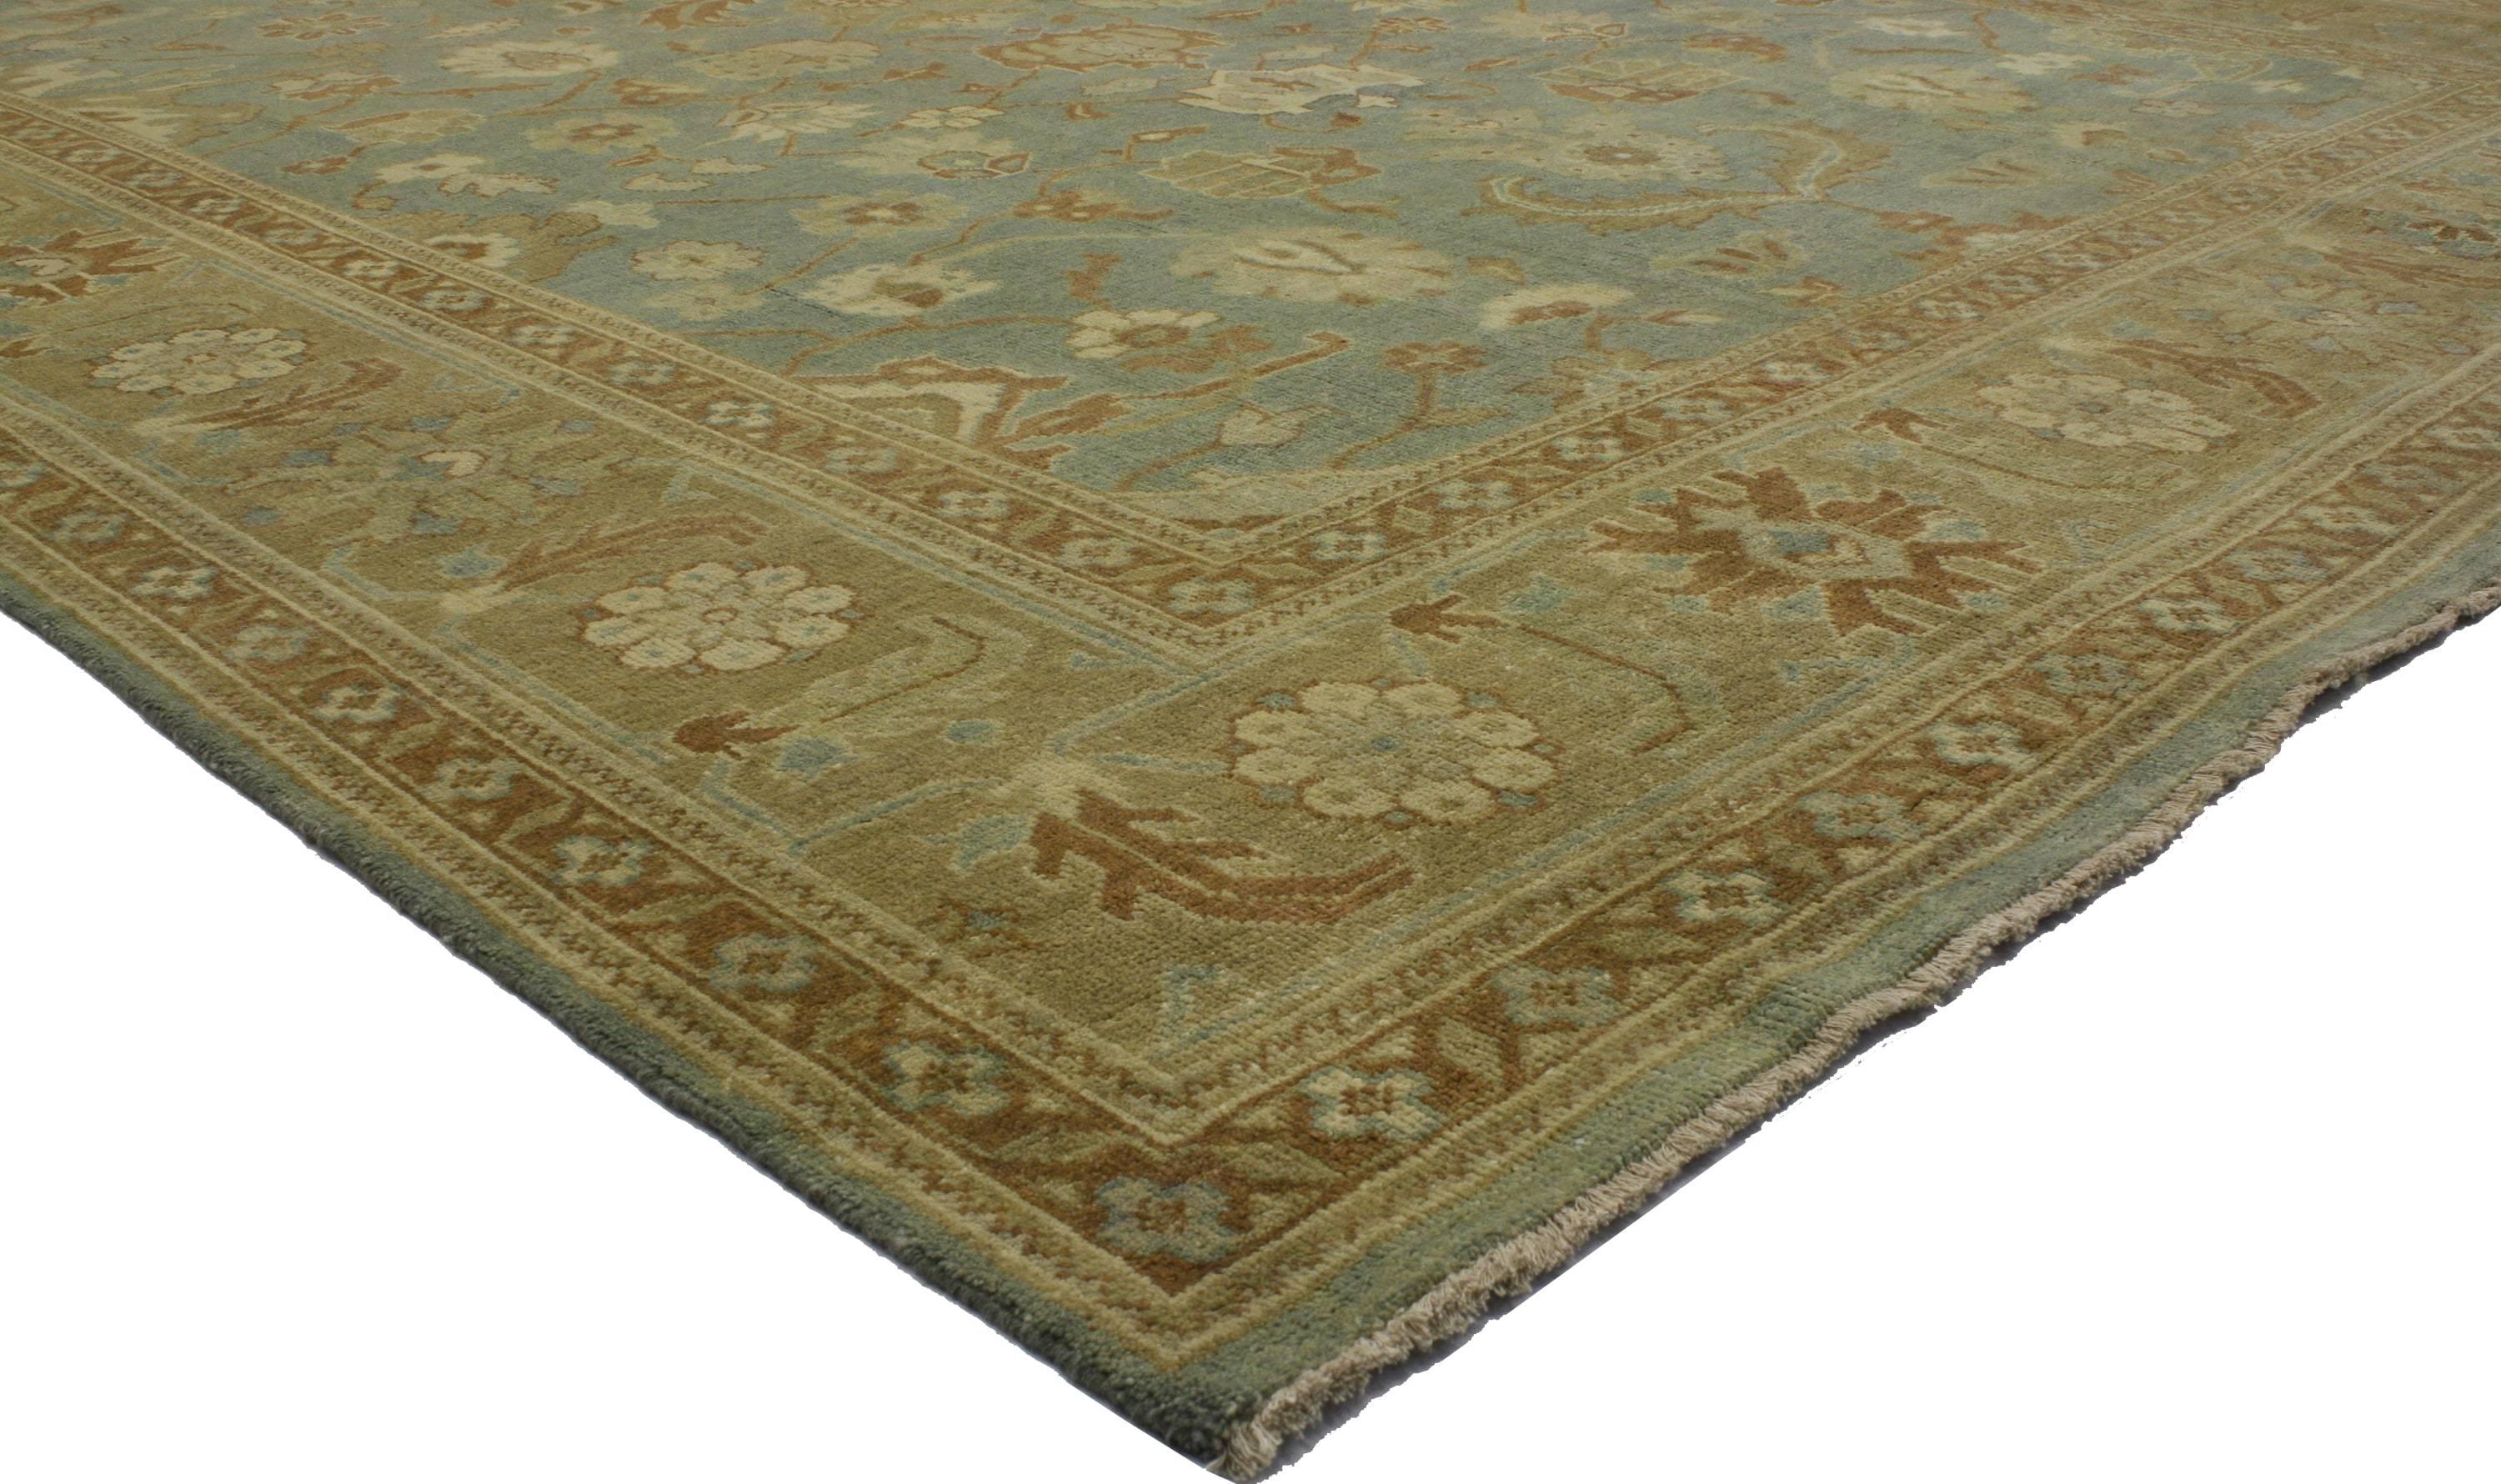 30186 New Transitional Area Rug with Oushak Pattern and Warm Colors 09'04 X 13'04. This hand knotted wool transitional area rug showcases a Classic Oushak pattern of all-over botanical motifs. Large palmettes, vines, open blossoms, lanceolate